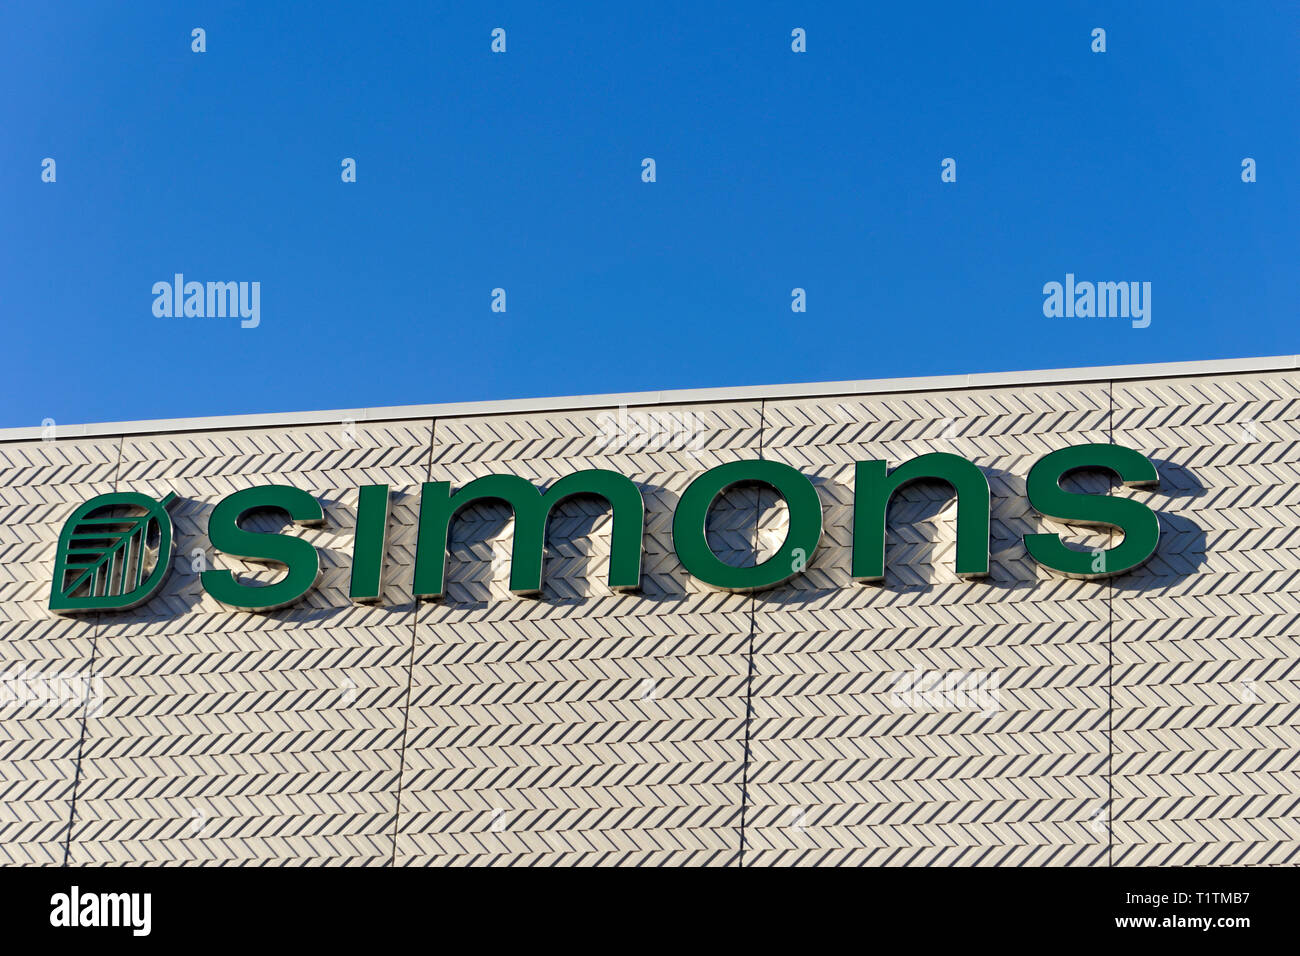 Simons clothing and home decor store sign, Park Royal Shopping Centre, West Vancouver, British Columbia, Canada Stock Photo